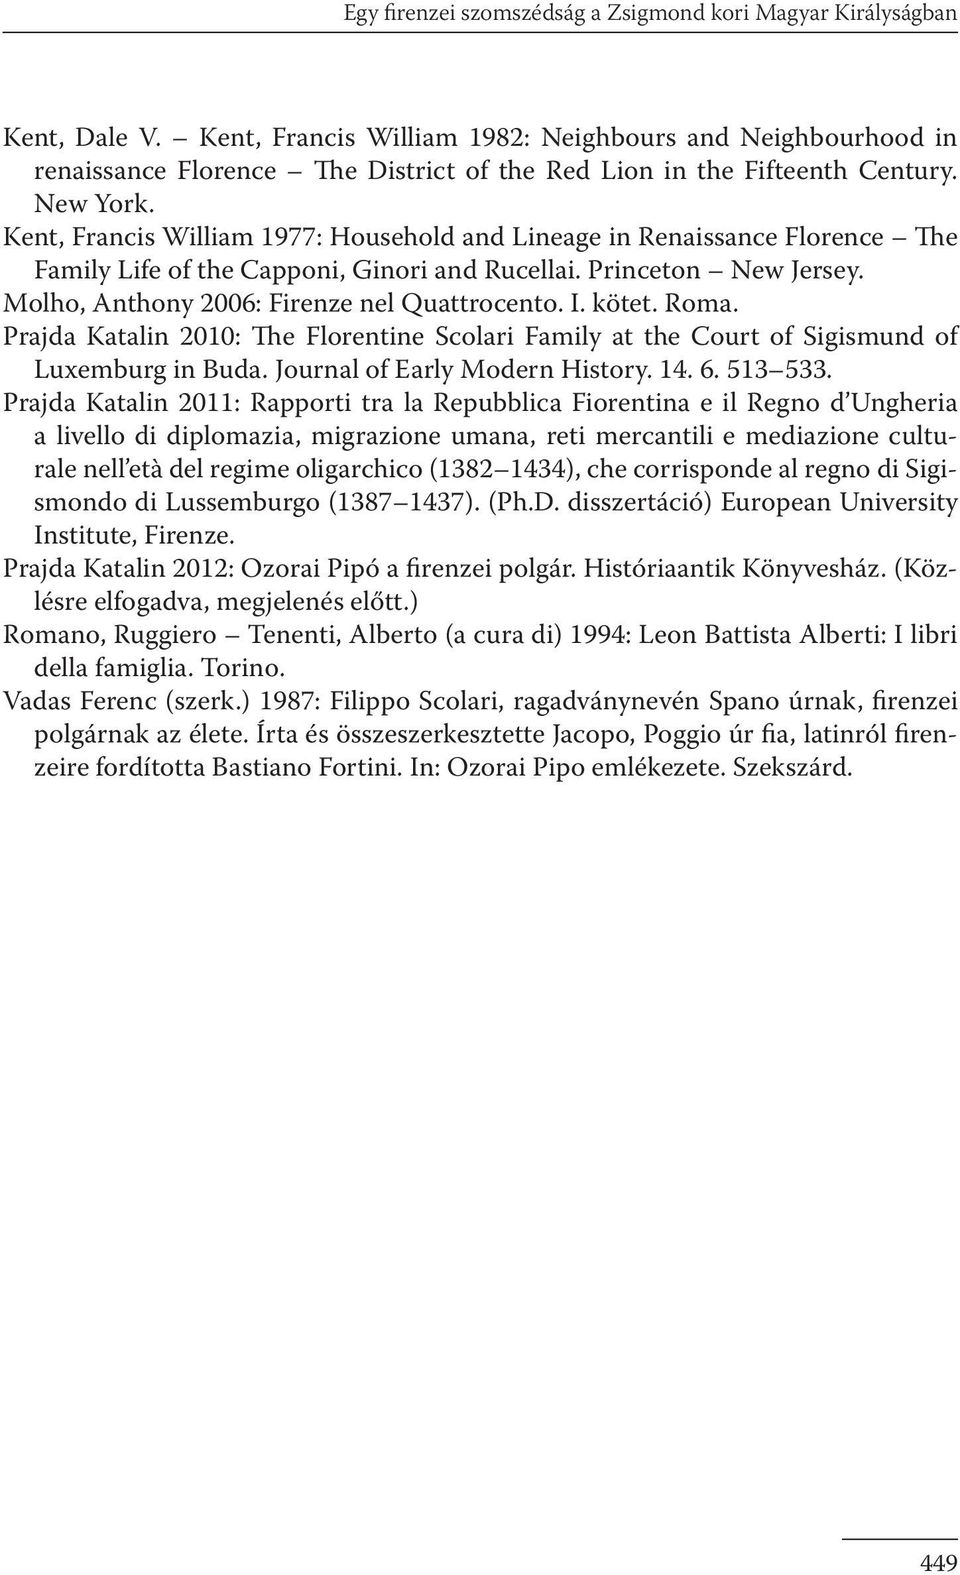 Kent, Francis William 1977: Household and Lineage in Renaissance Florence The Family Life of the Capponi, Ginori and Rucellai. Princeton New Jersey. Molho, Anthony 2006: Firenze nel Quattrocento. I.